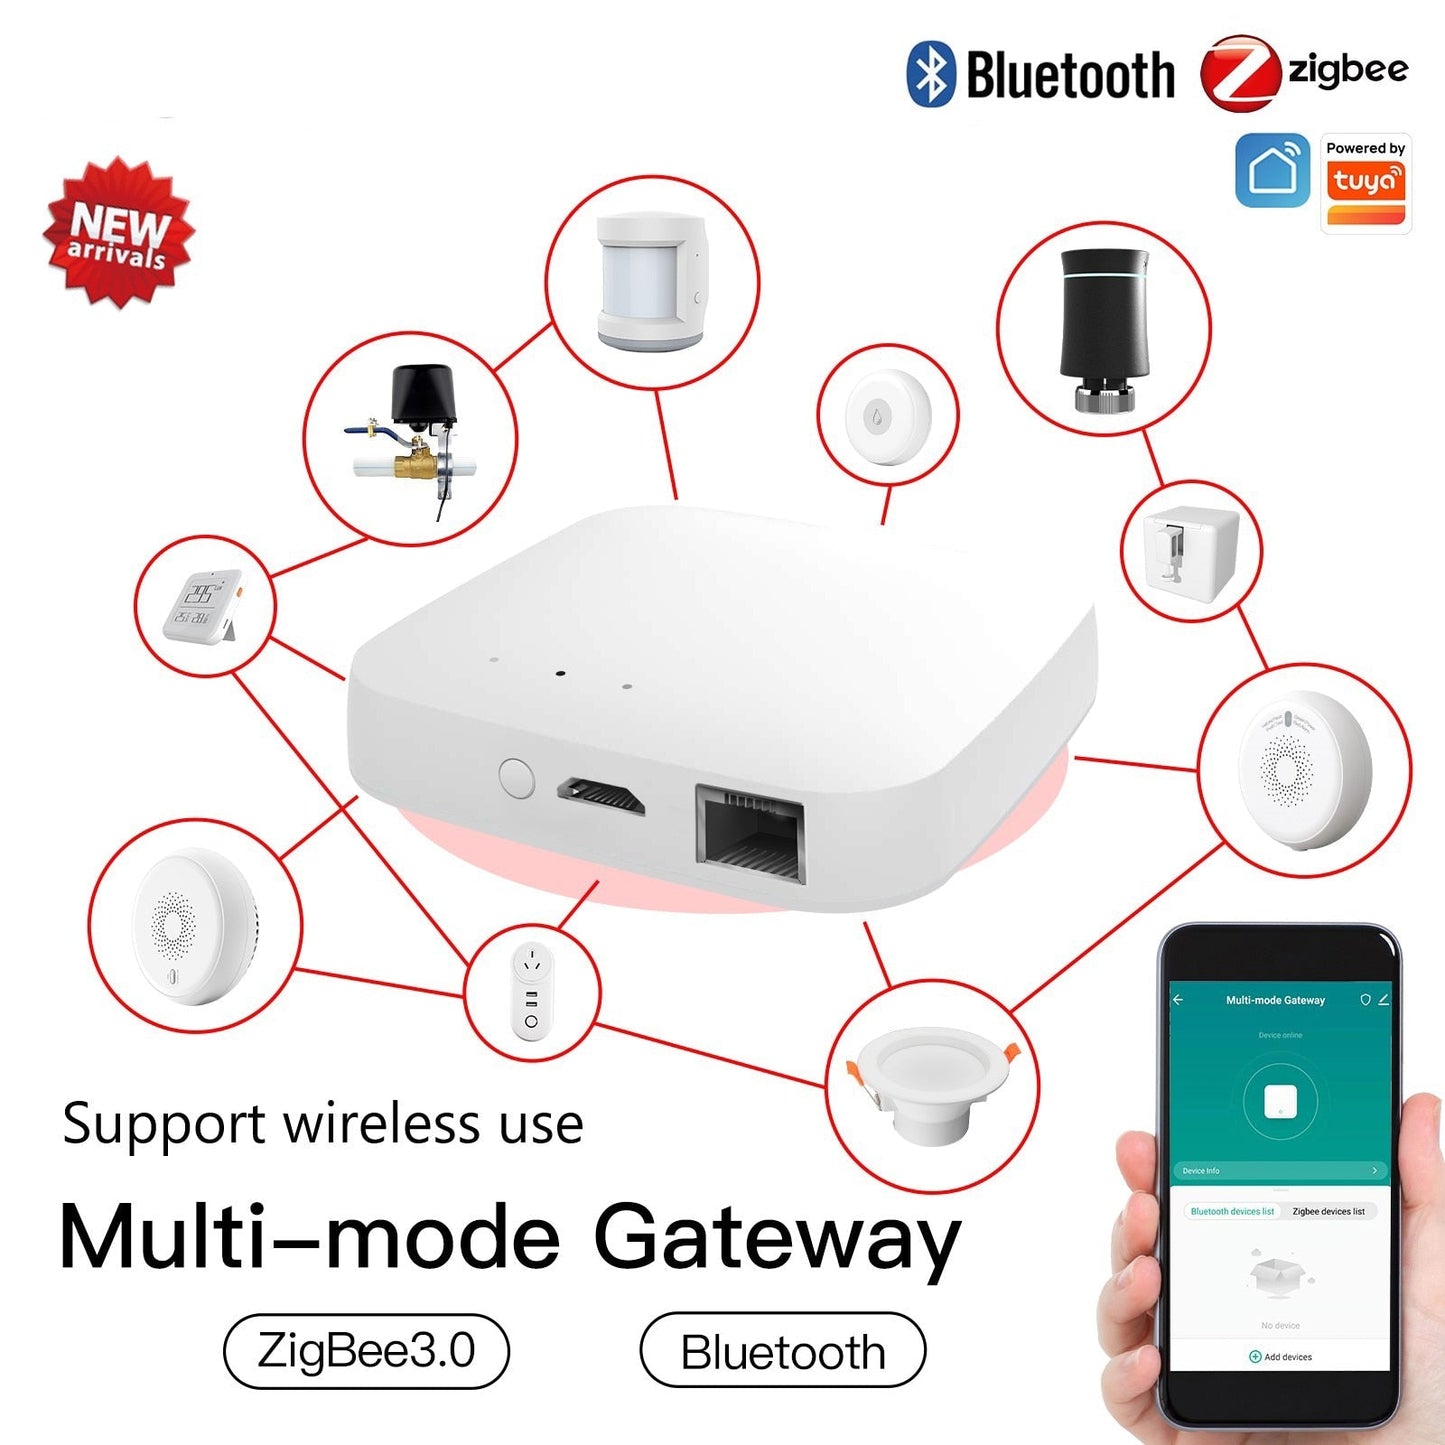 Smart Switch Button Pusher - Beri Collection 